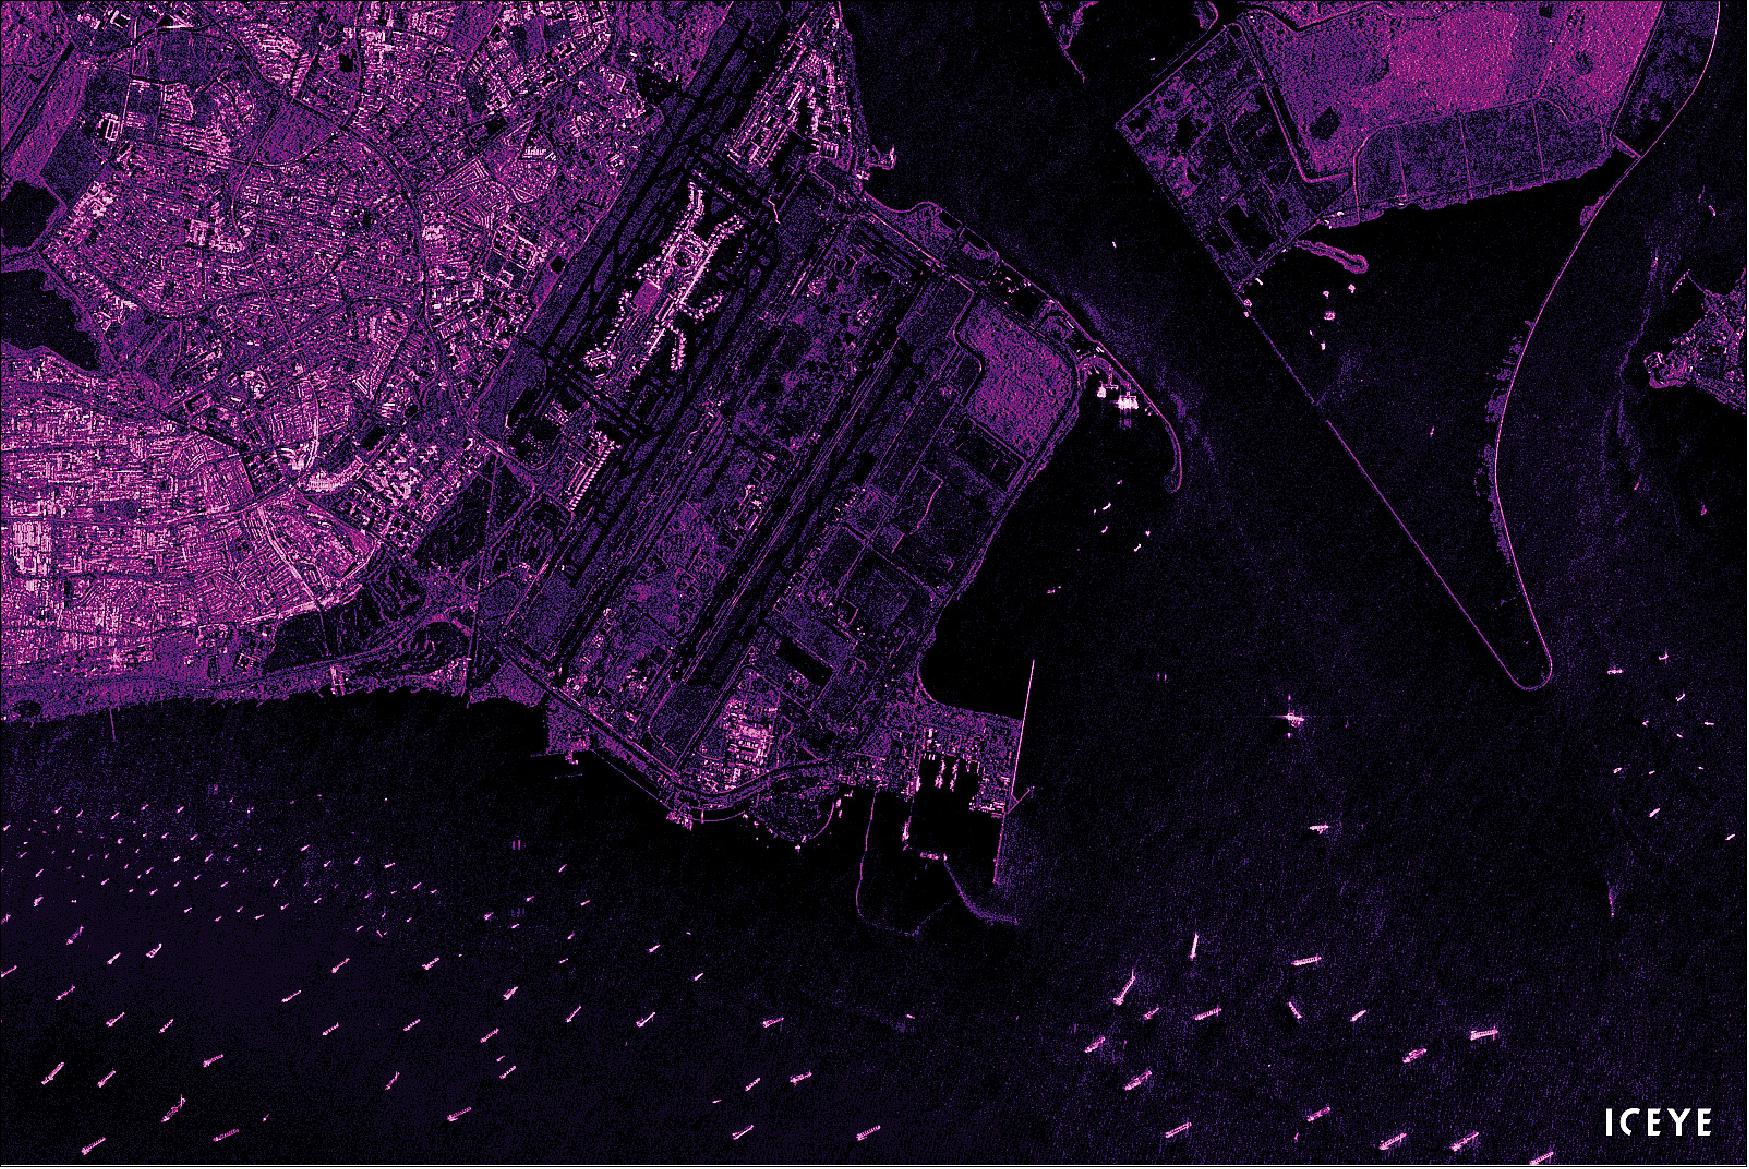 Figure 51: ICEYE-X2 radar satellite image of Singapore, showing large vessels and the Changi Airport Singapore (image credit: ICEYE)